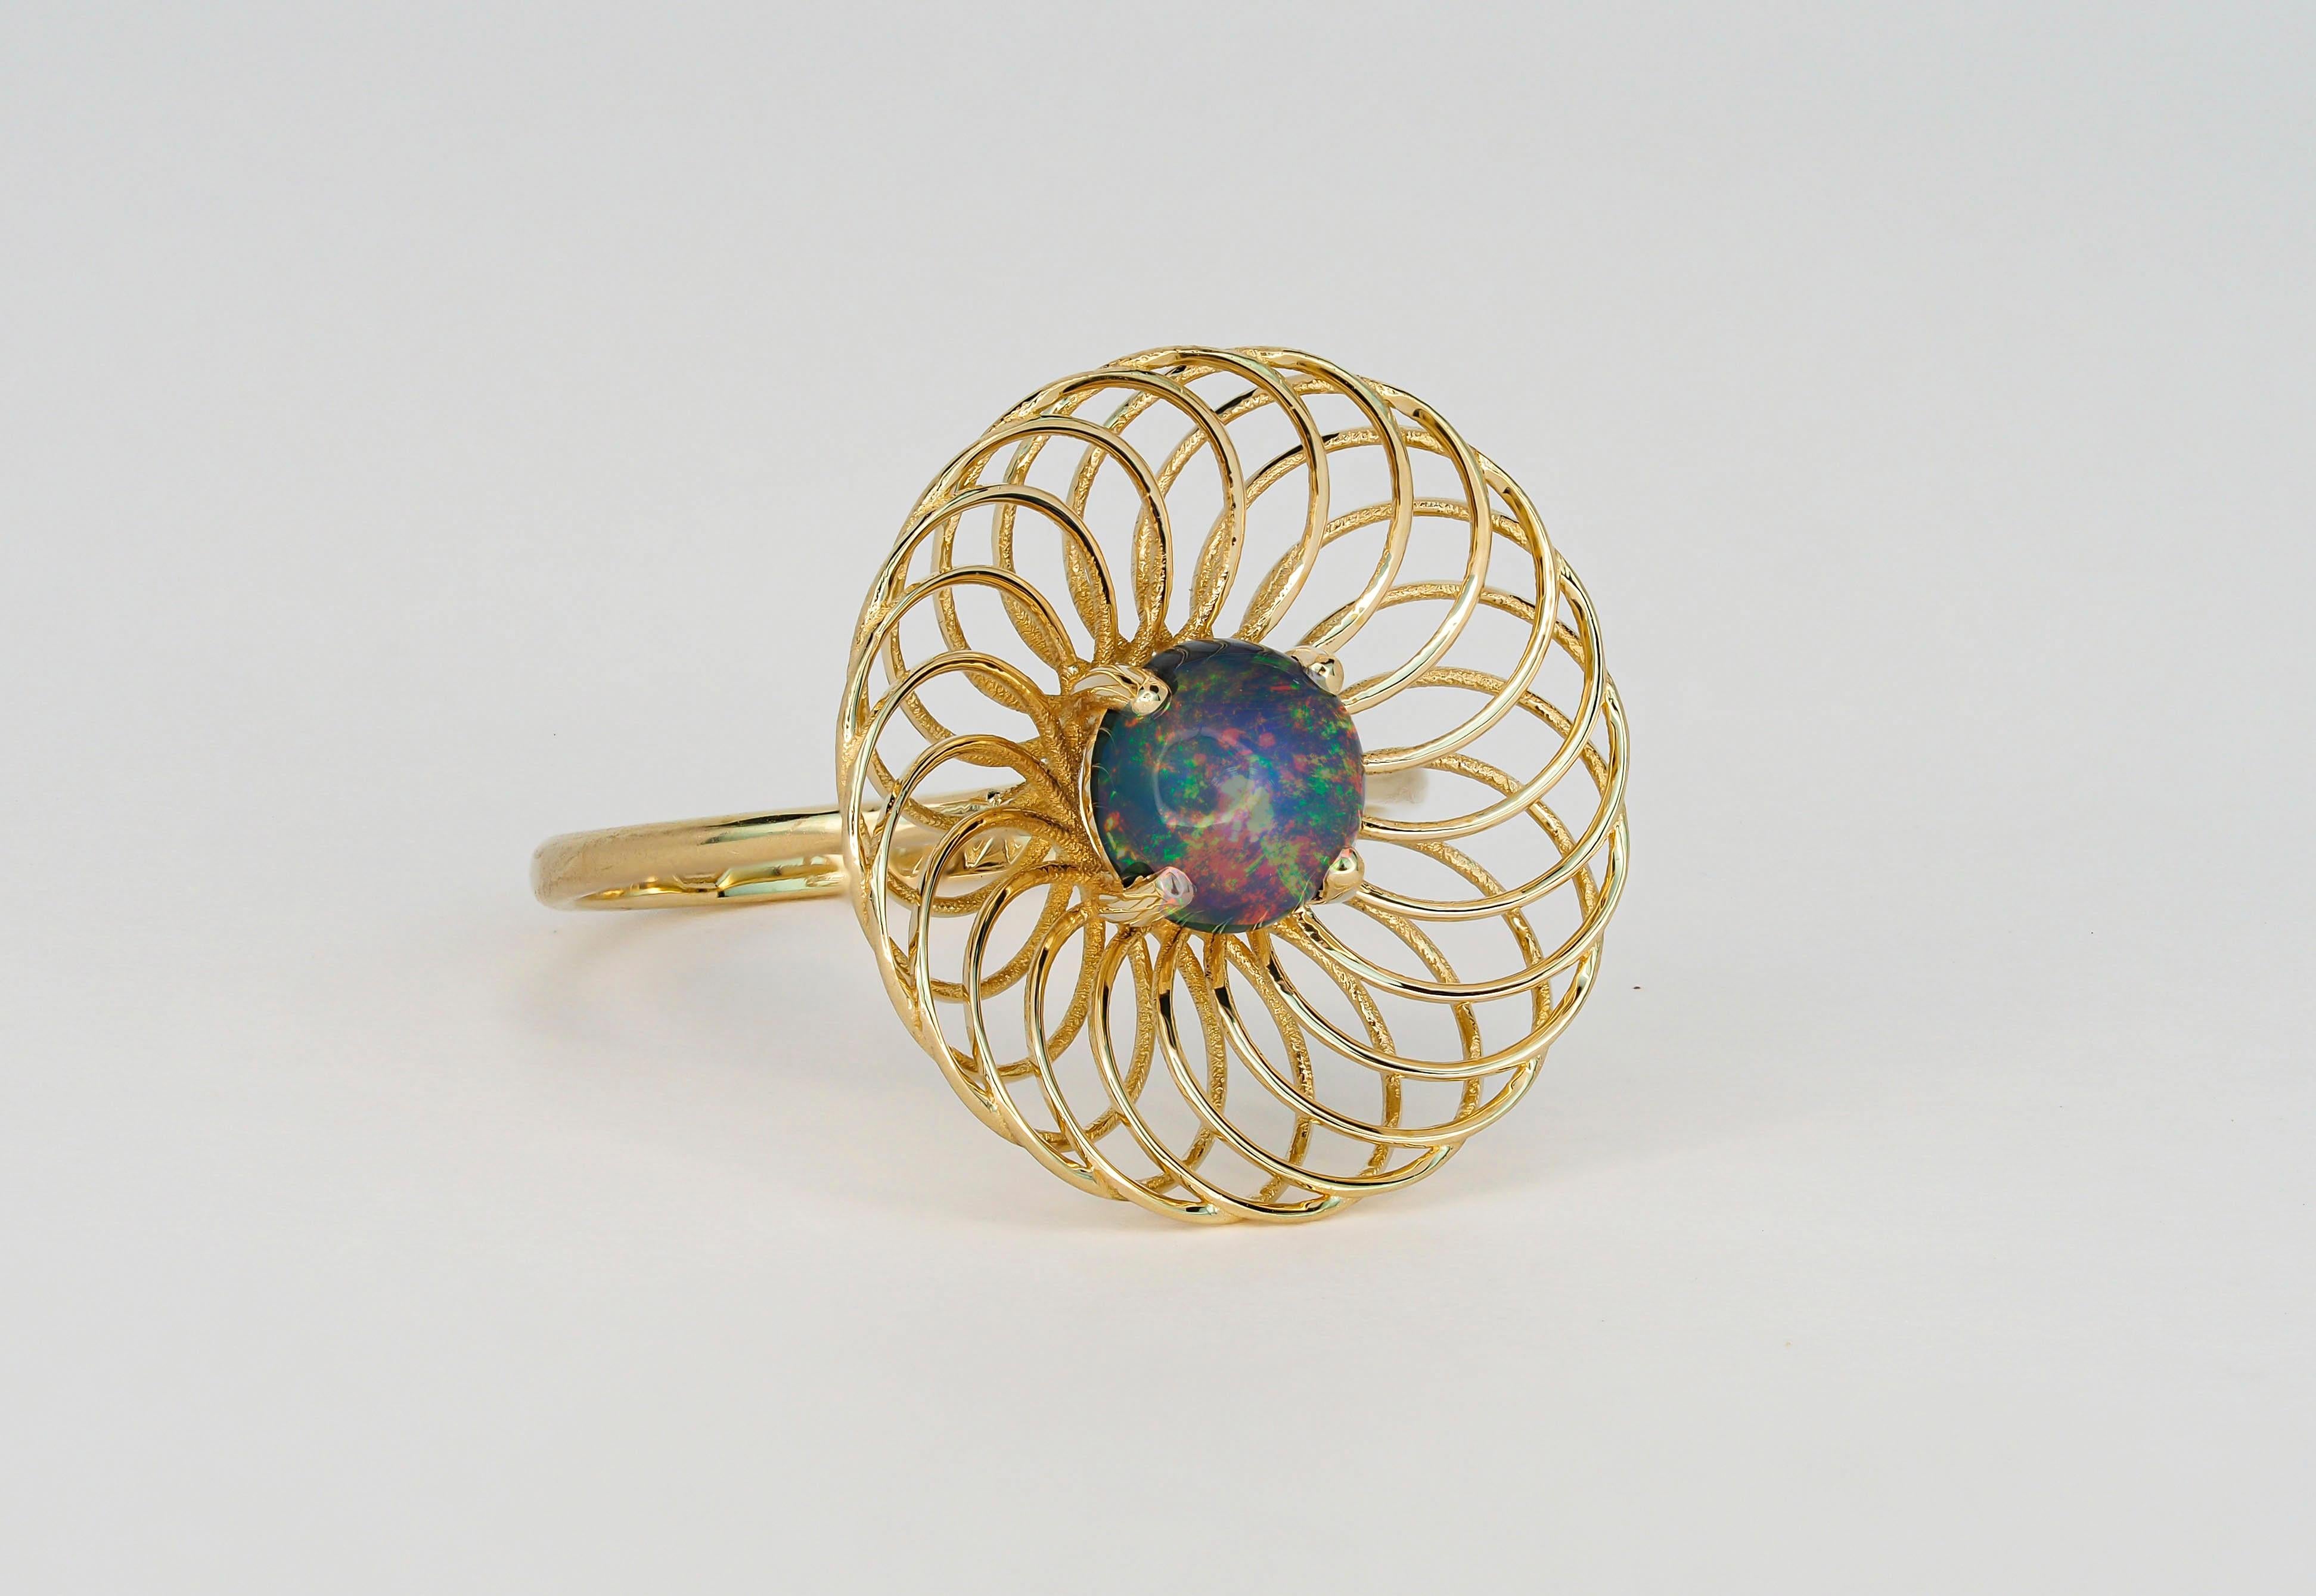 Round black opal ring in 14k gold. 
Opal gold ring. Geometric opal ring. Dainty colorful opal ring. Unique Floral Ring. Ethiopian opal ring.

Metal: 14k gold
Weight 2.00 g. depends from size

Gemstones:
Central stone: Natural opal
Cut: round